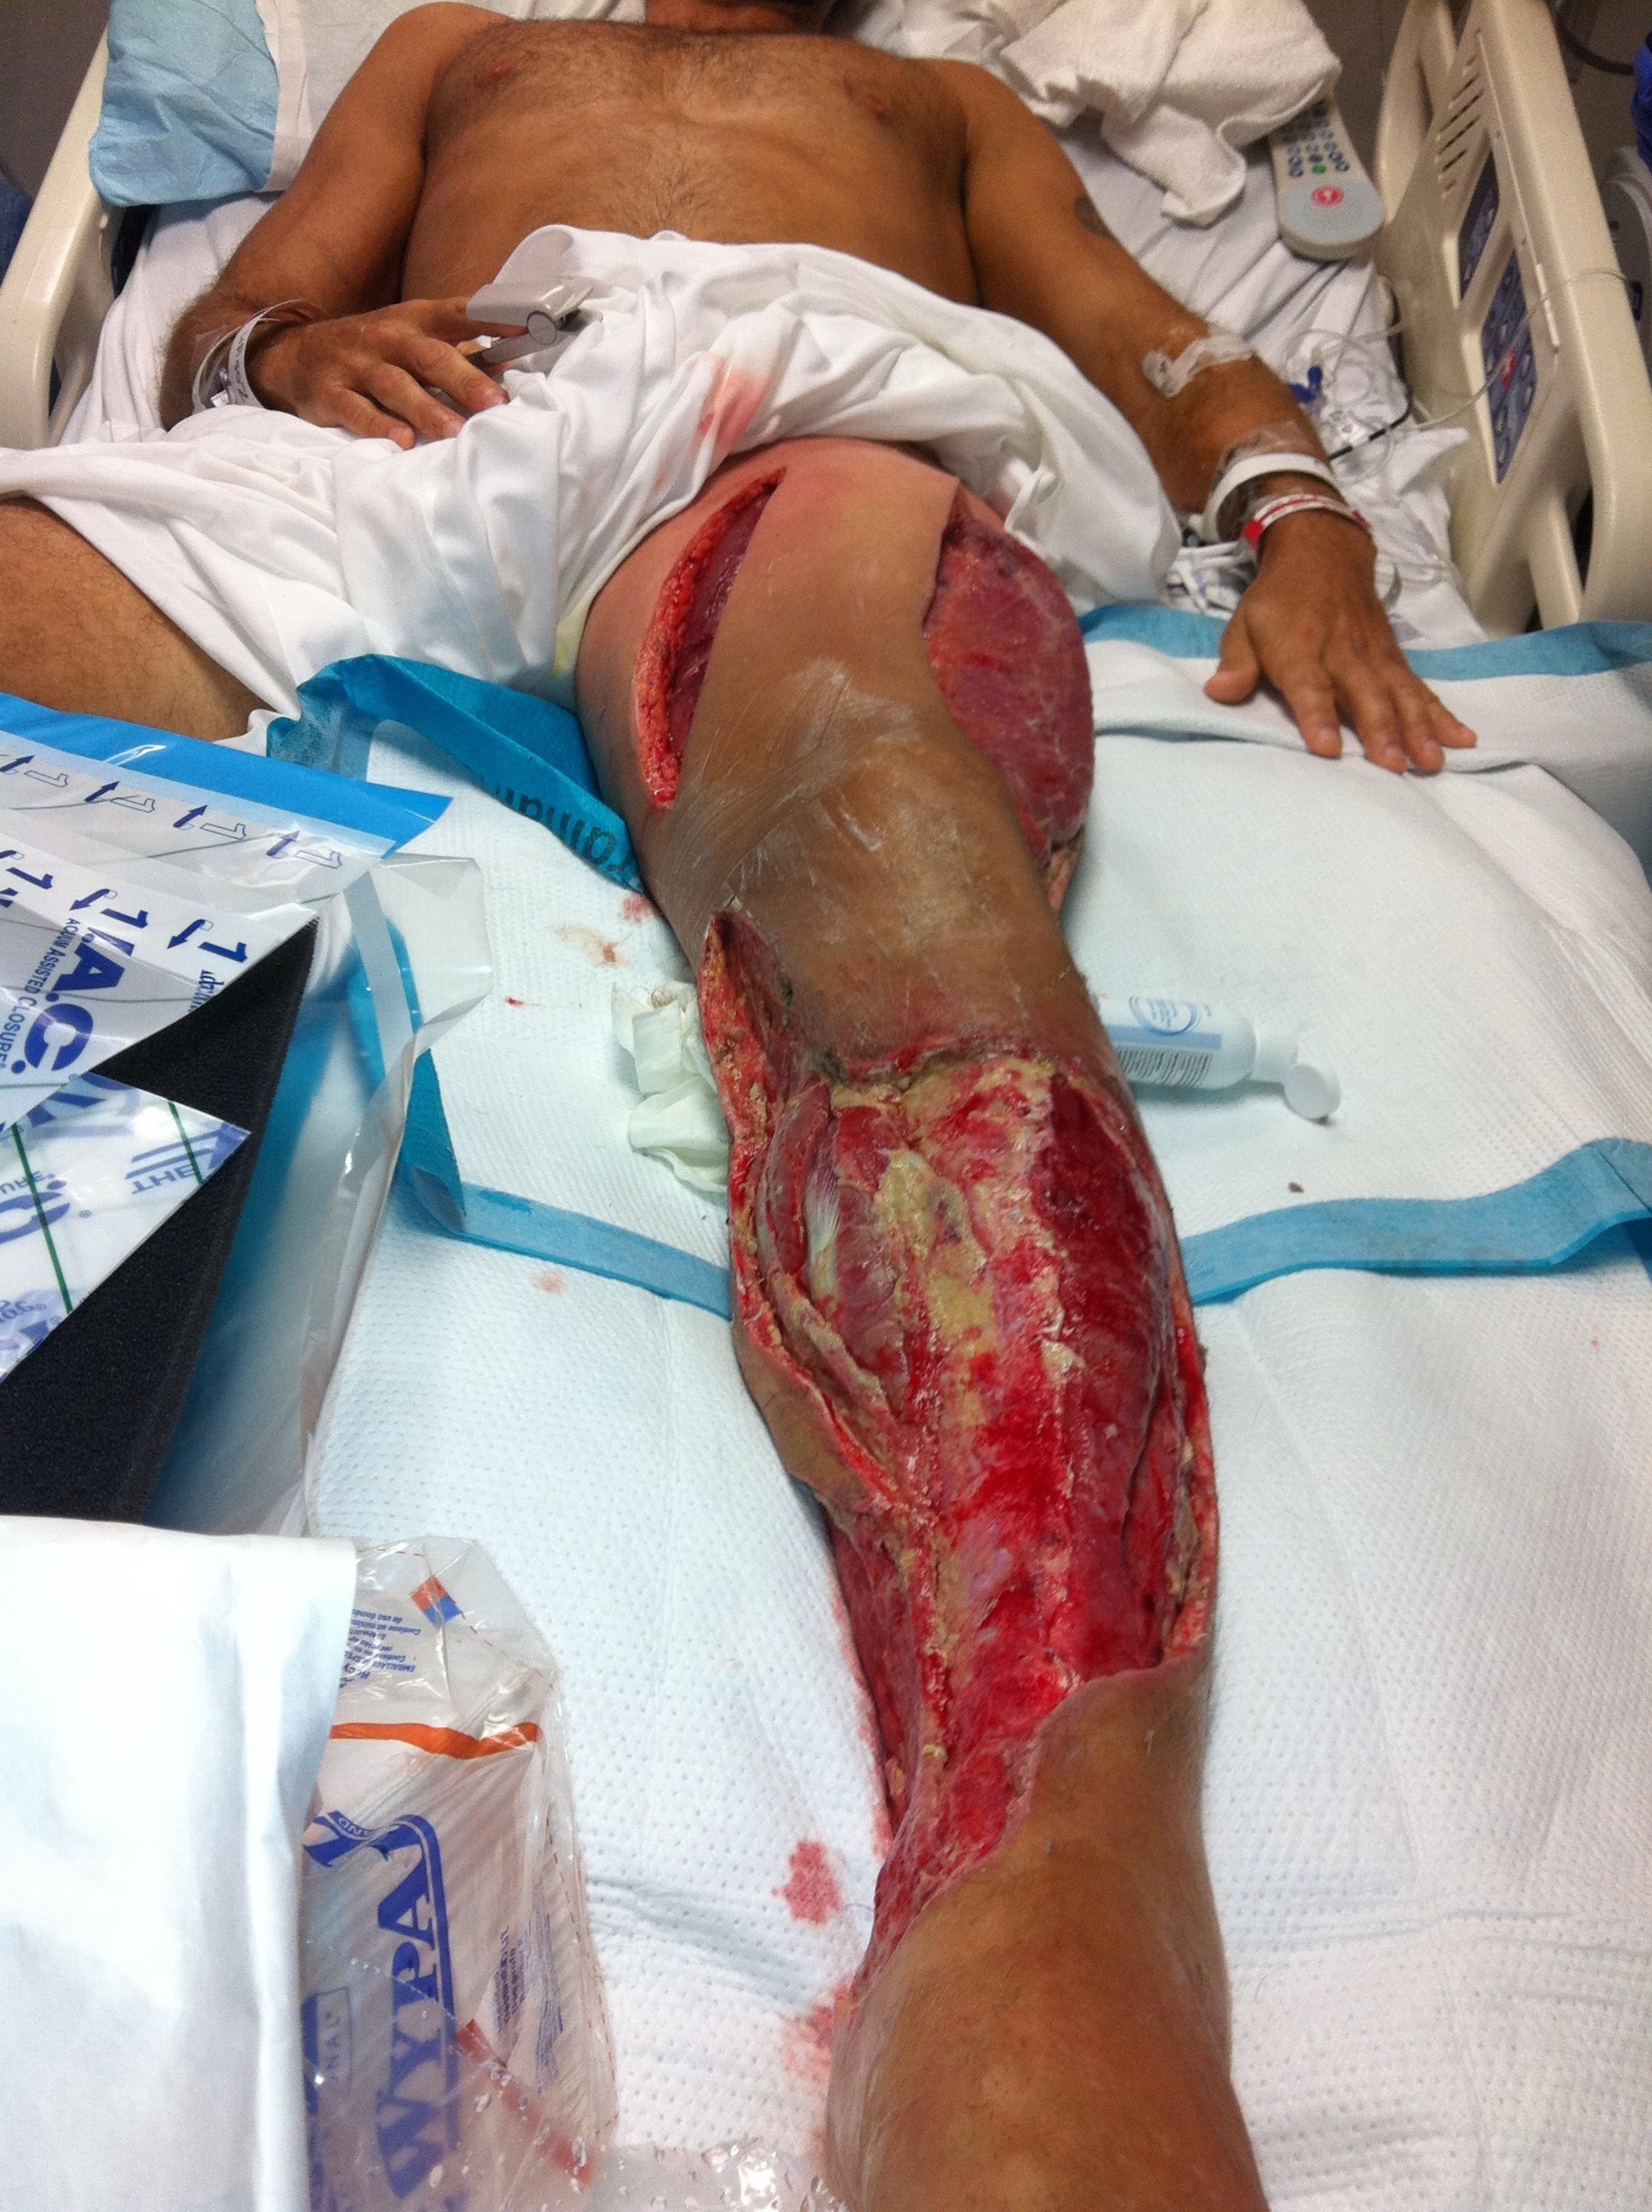 While swimming in the Pacific Ocean, off the Marshall Islands, Jared Hamilton cut his ankle on a piece of coral.  This simple injury soon progressed into a potentially life and limb threatening infection known as necrotizing fasciitis or “flesh eating disease.”  While the bacteria that caused the infection had been killed by antibiotics, the tissue destroying toxic proteins produced by the bacteria were unaffected and continued to migrate up his leg, destroying an ever increasing amount of tissue along the way.  It soon became apparent Jared needed to be transferred to Honolulu for advanced medical treatment. (PRNewsFoto/NNFF)